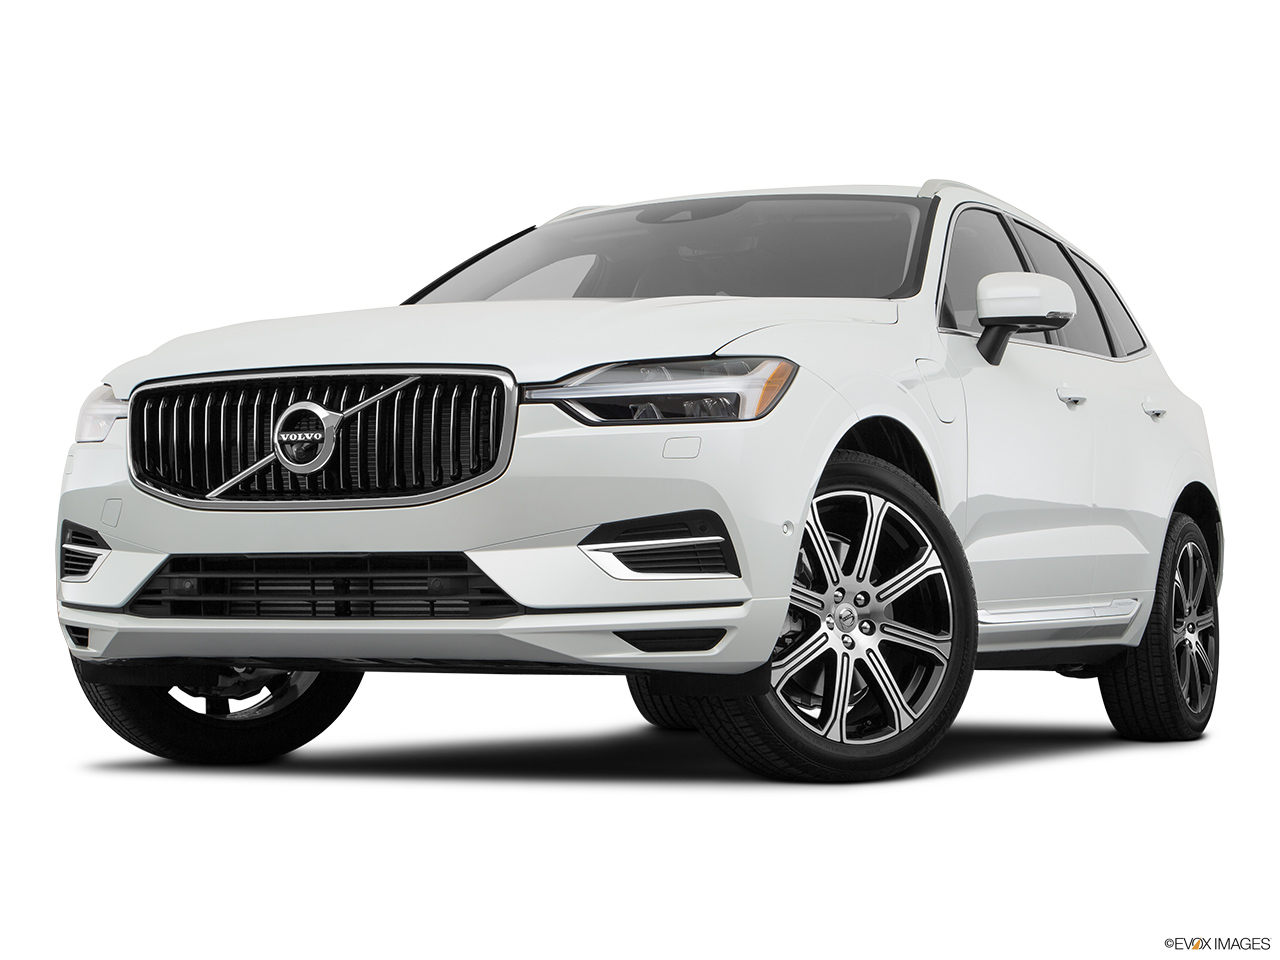 2019 Volvo XC60 T8 Inscription eAWD Plug-in Hybrid Front angle view, low wide perspective. 